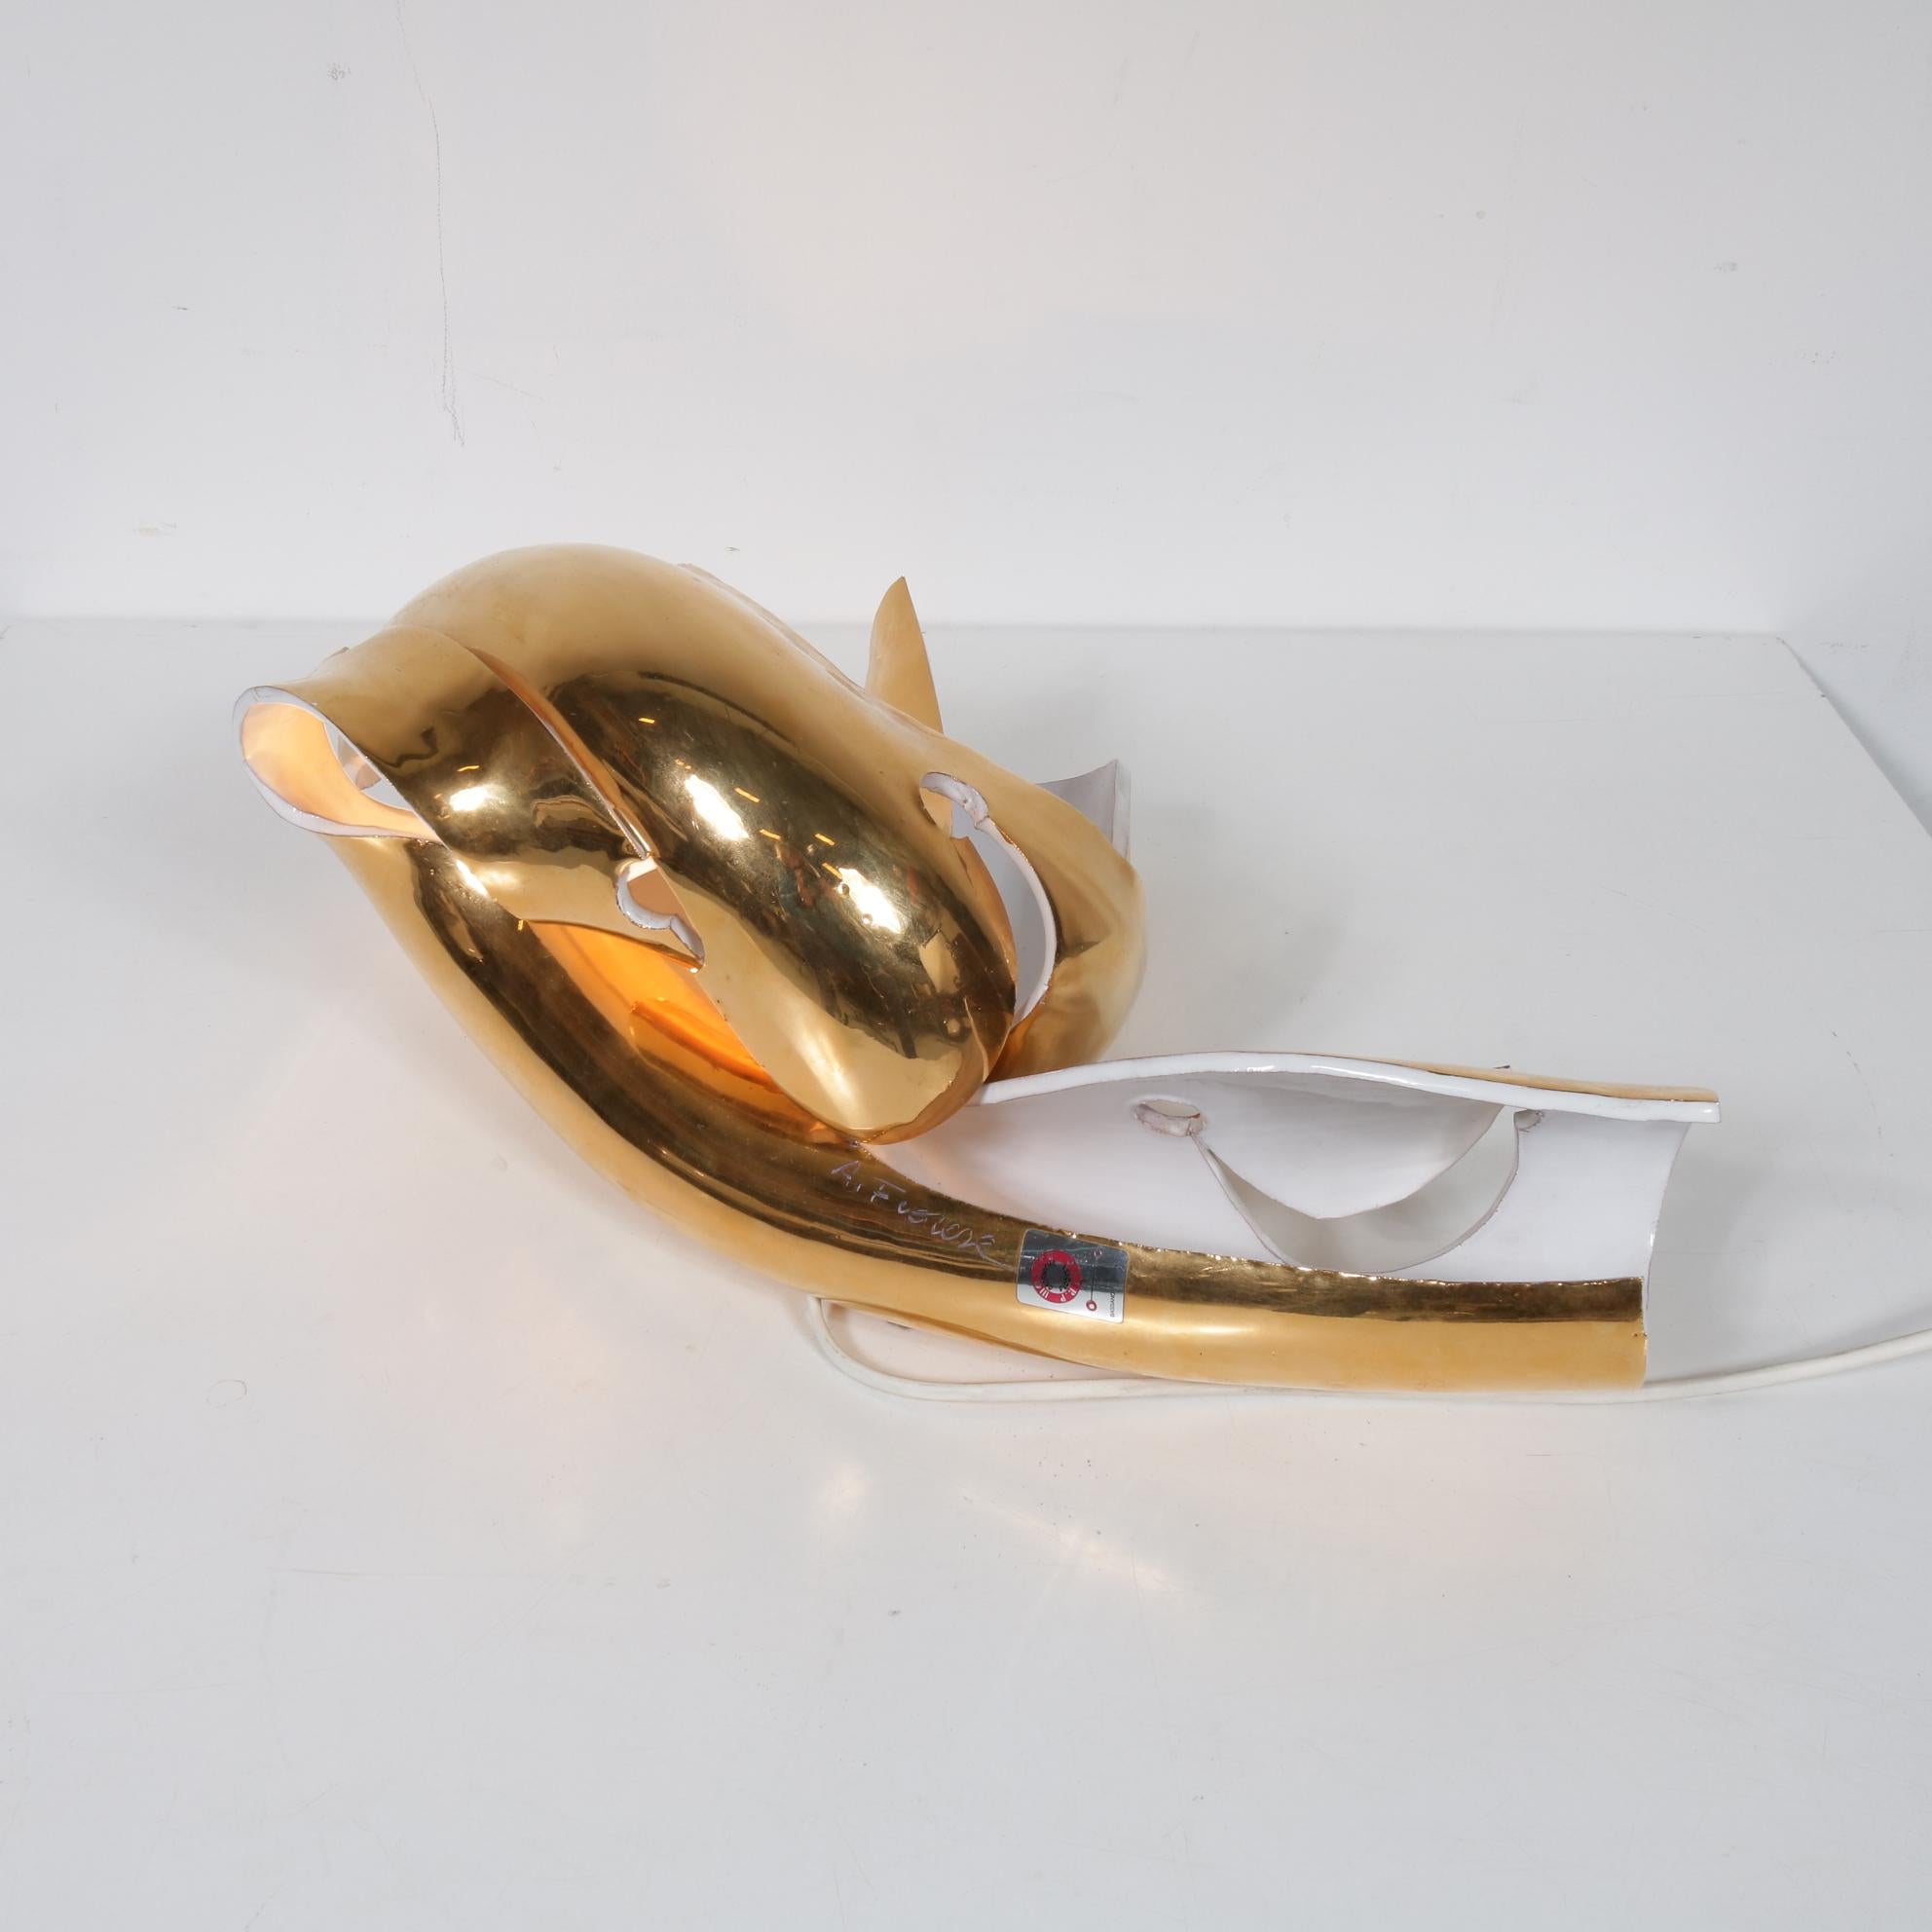 Sculptural Table Light by Amadeo Fiorese for Cermiche Fiorese, Italy 1960 For Sale 2